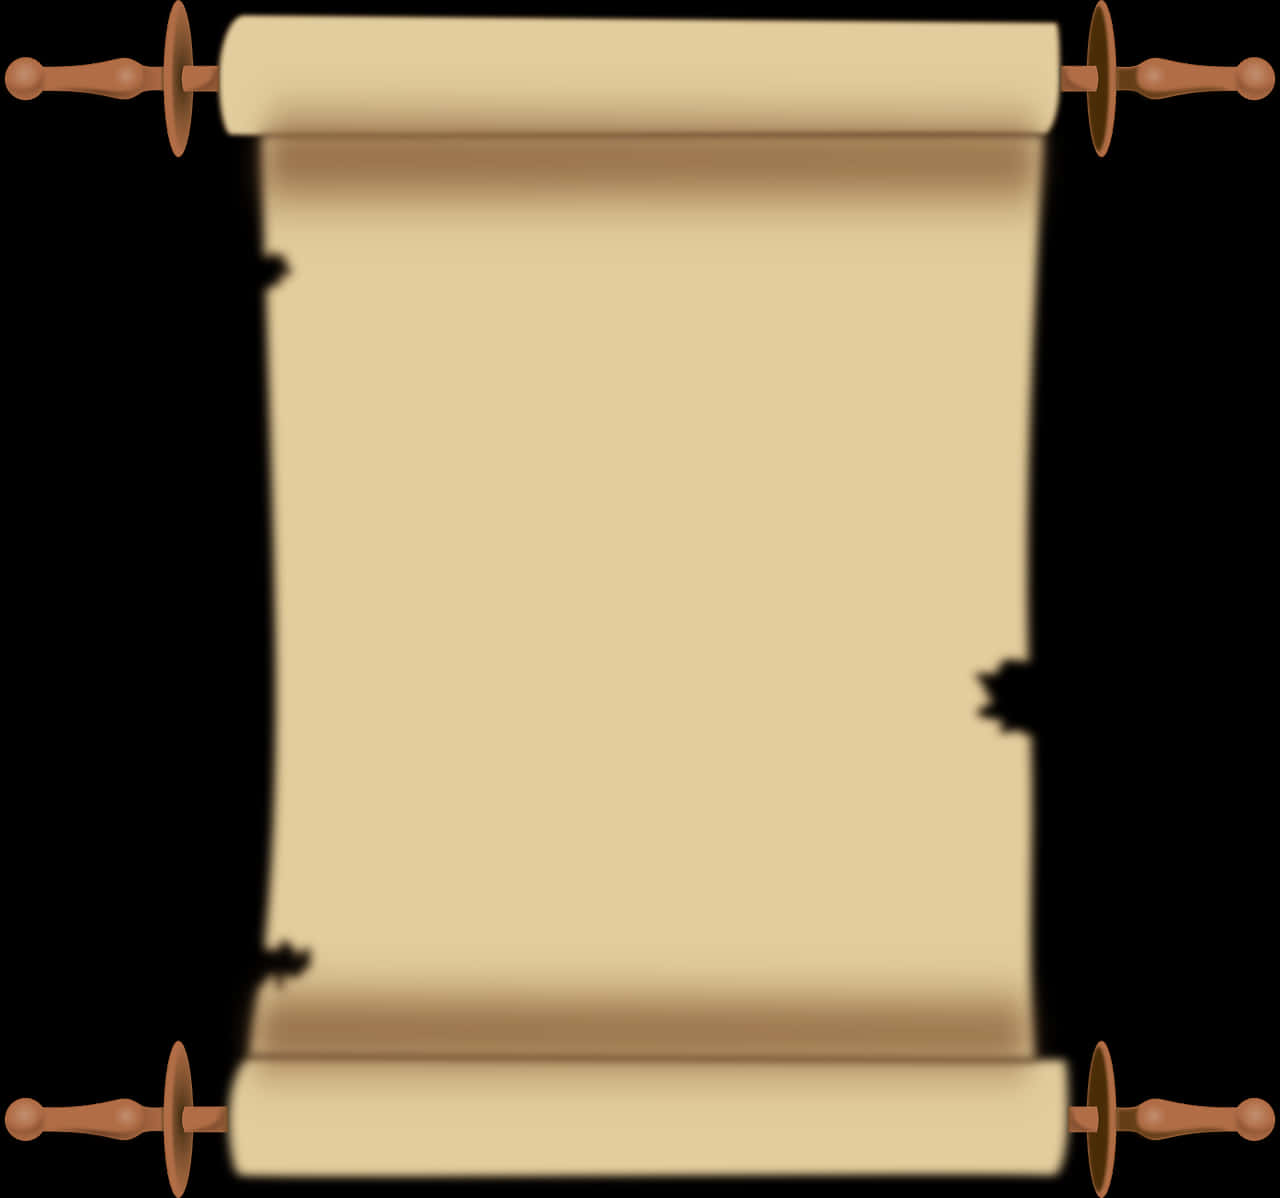 A Scroll Of Paper With Wooden Handles